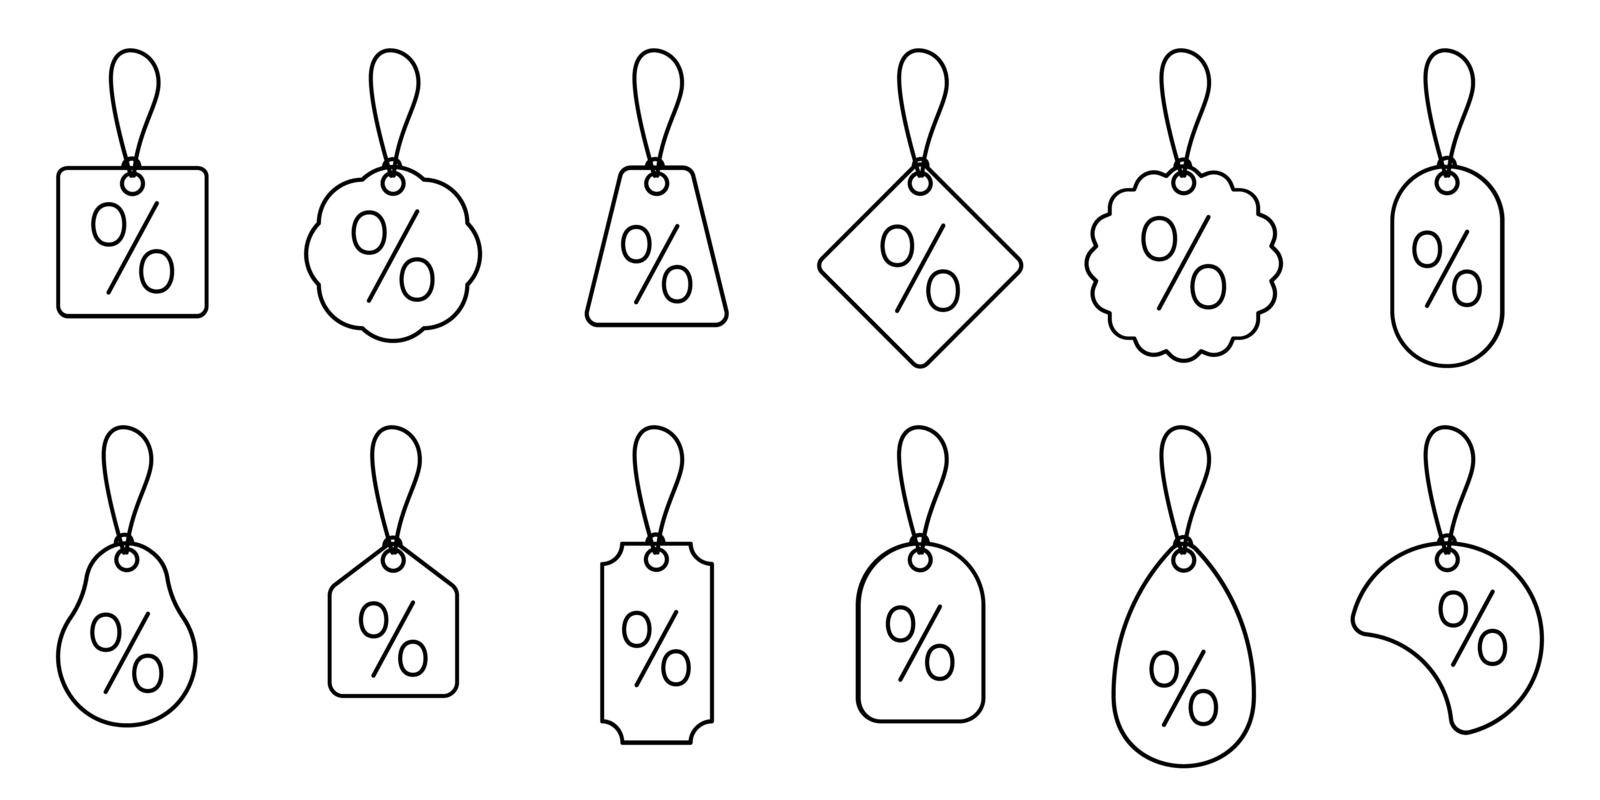 Discount offer tag icons. Set of linear shopping tag icons. Conceptual business icons. by Chekman